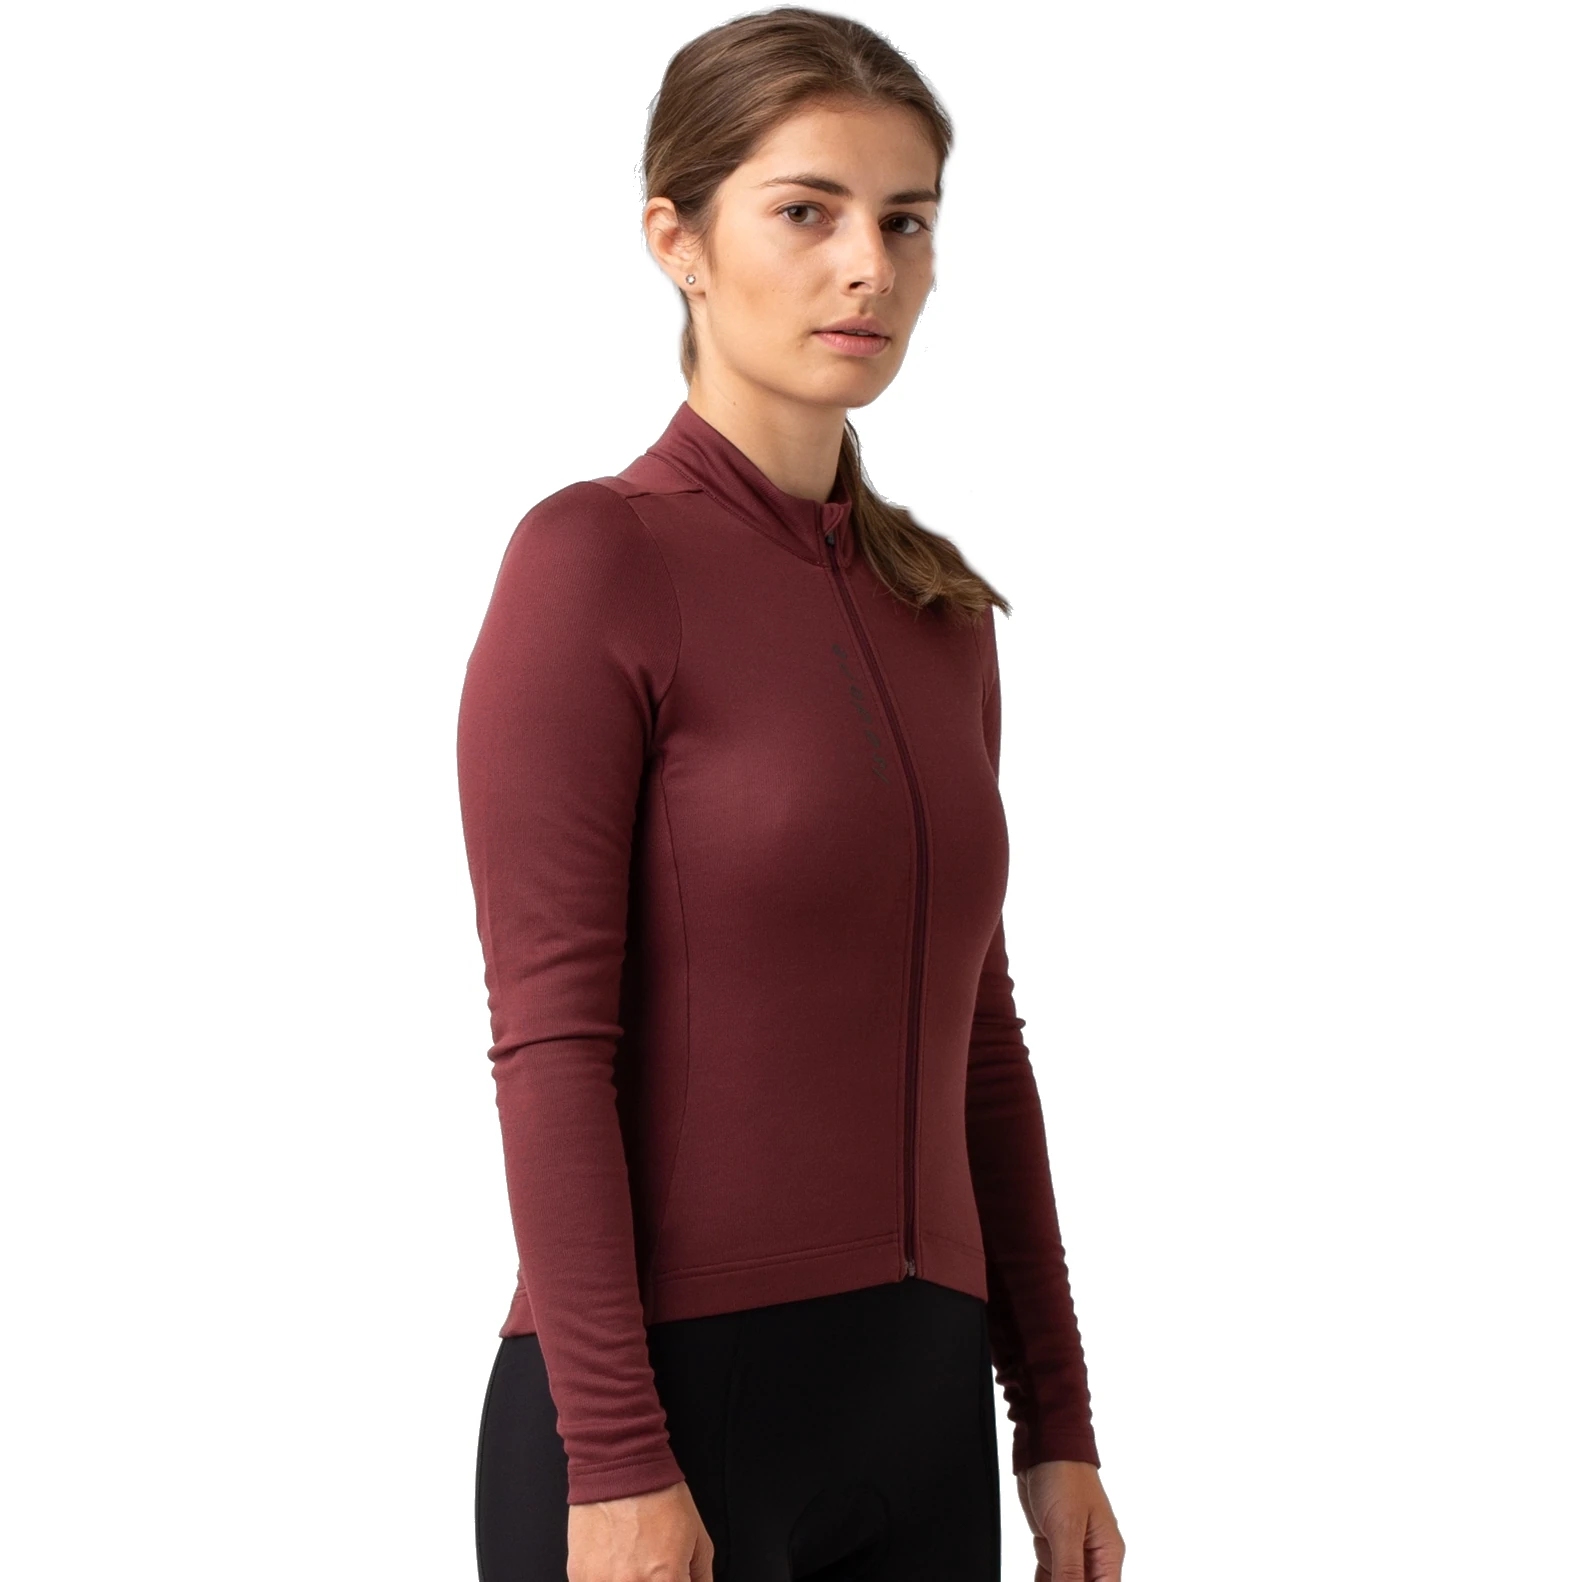 Picture of Isadore Signature Thermal Long Sleeve Jersey Women - Red Mahogany